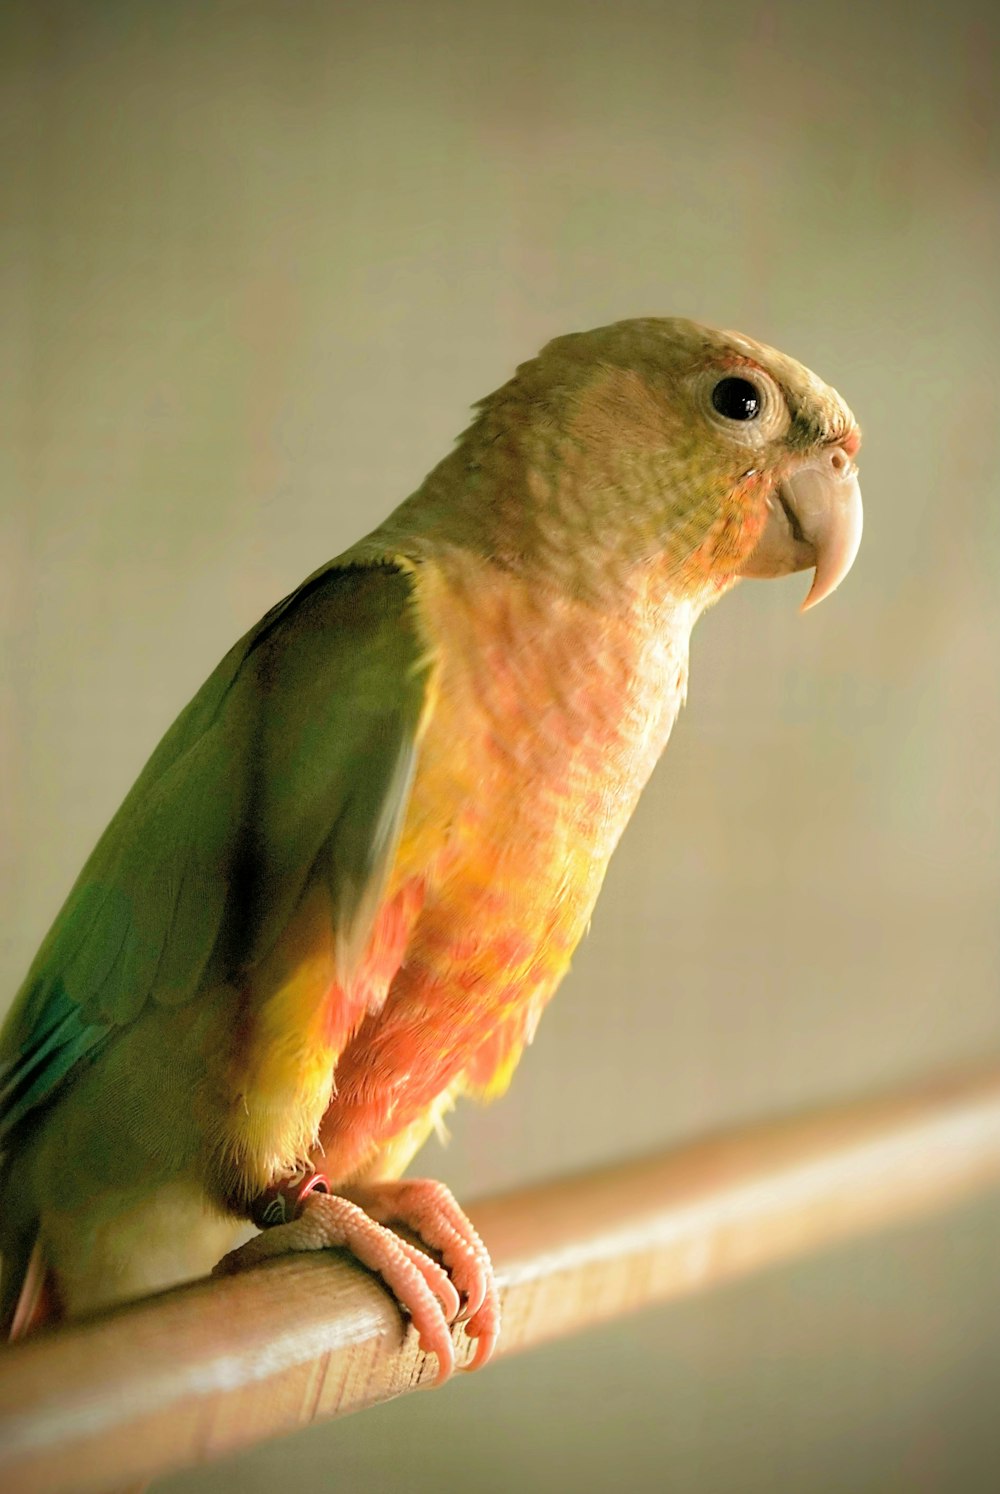 a bird with a yellow and green head